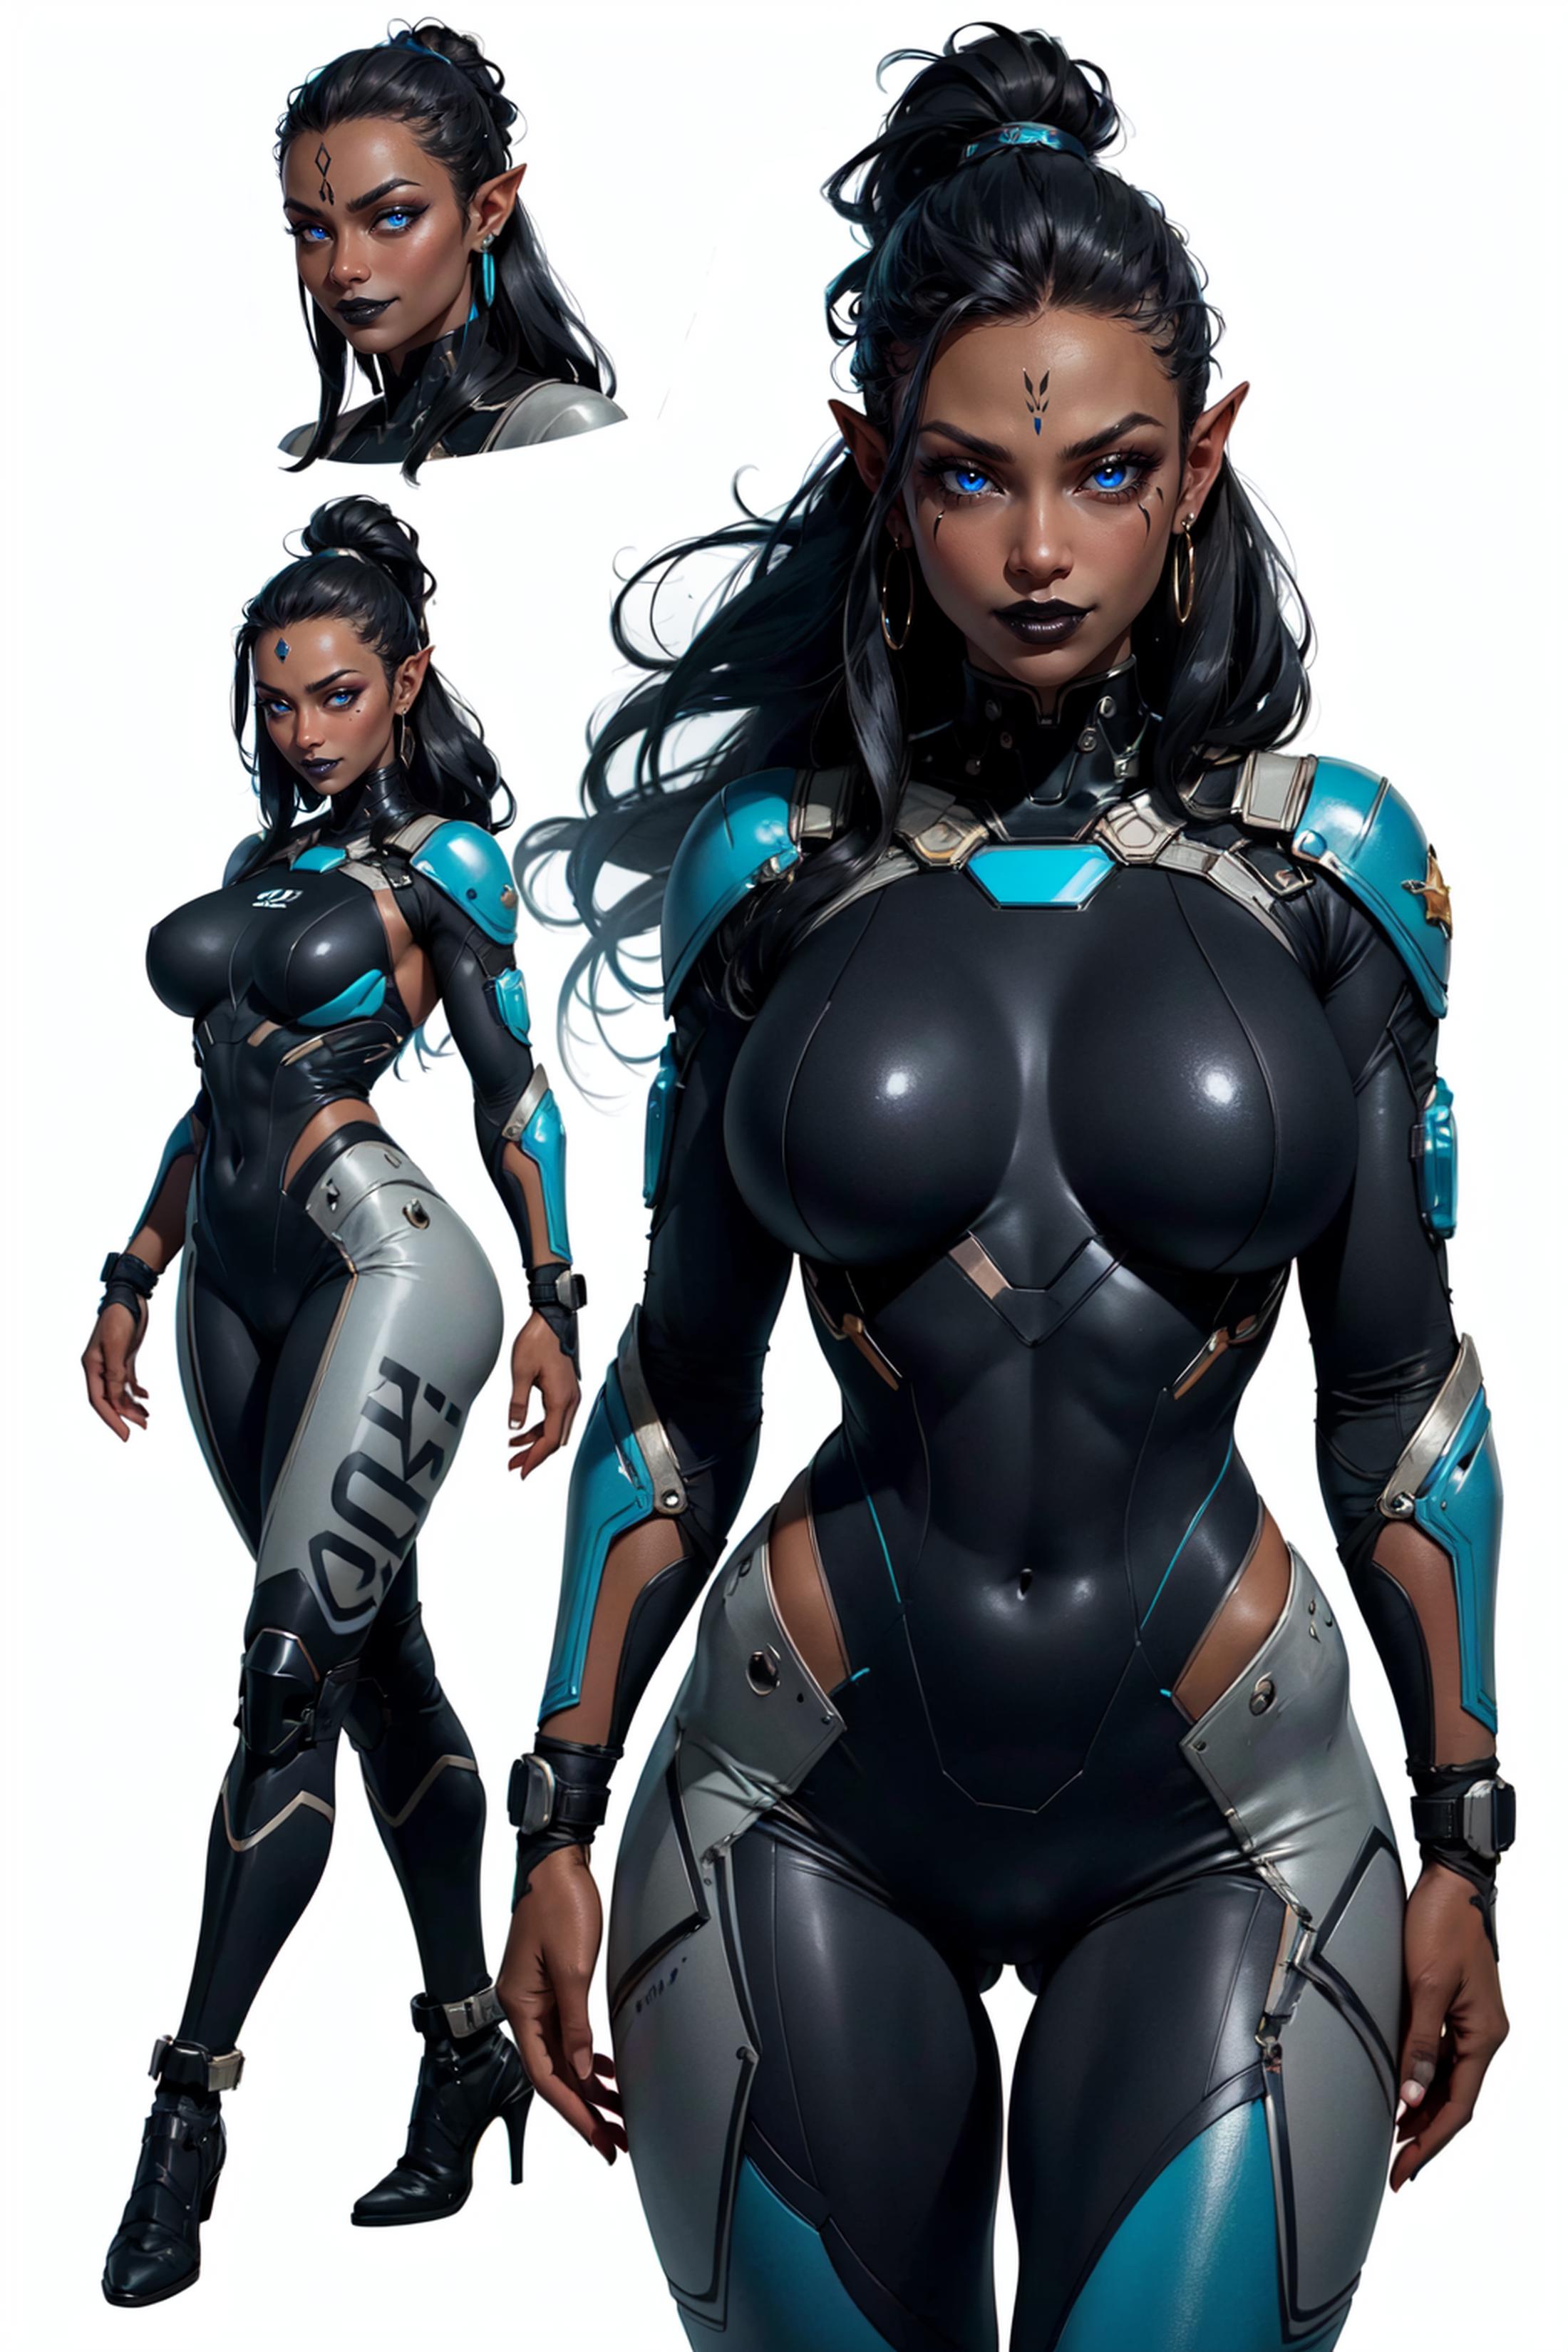 3D rendering of a female warrior with blue eyes, wearing a tight outfit and a sword.